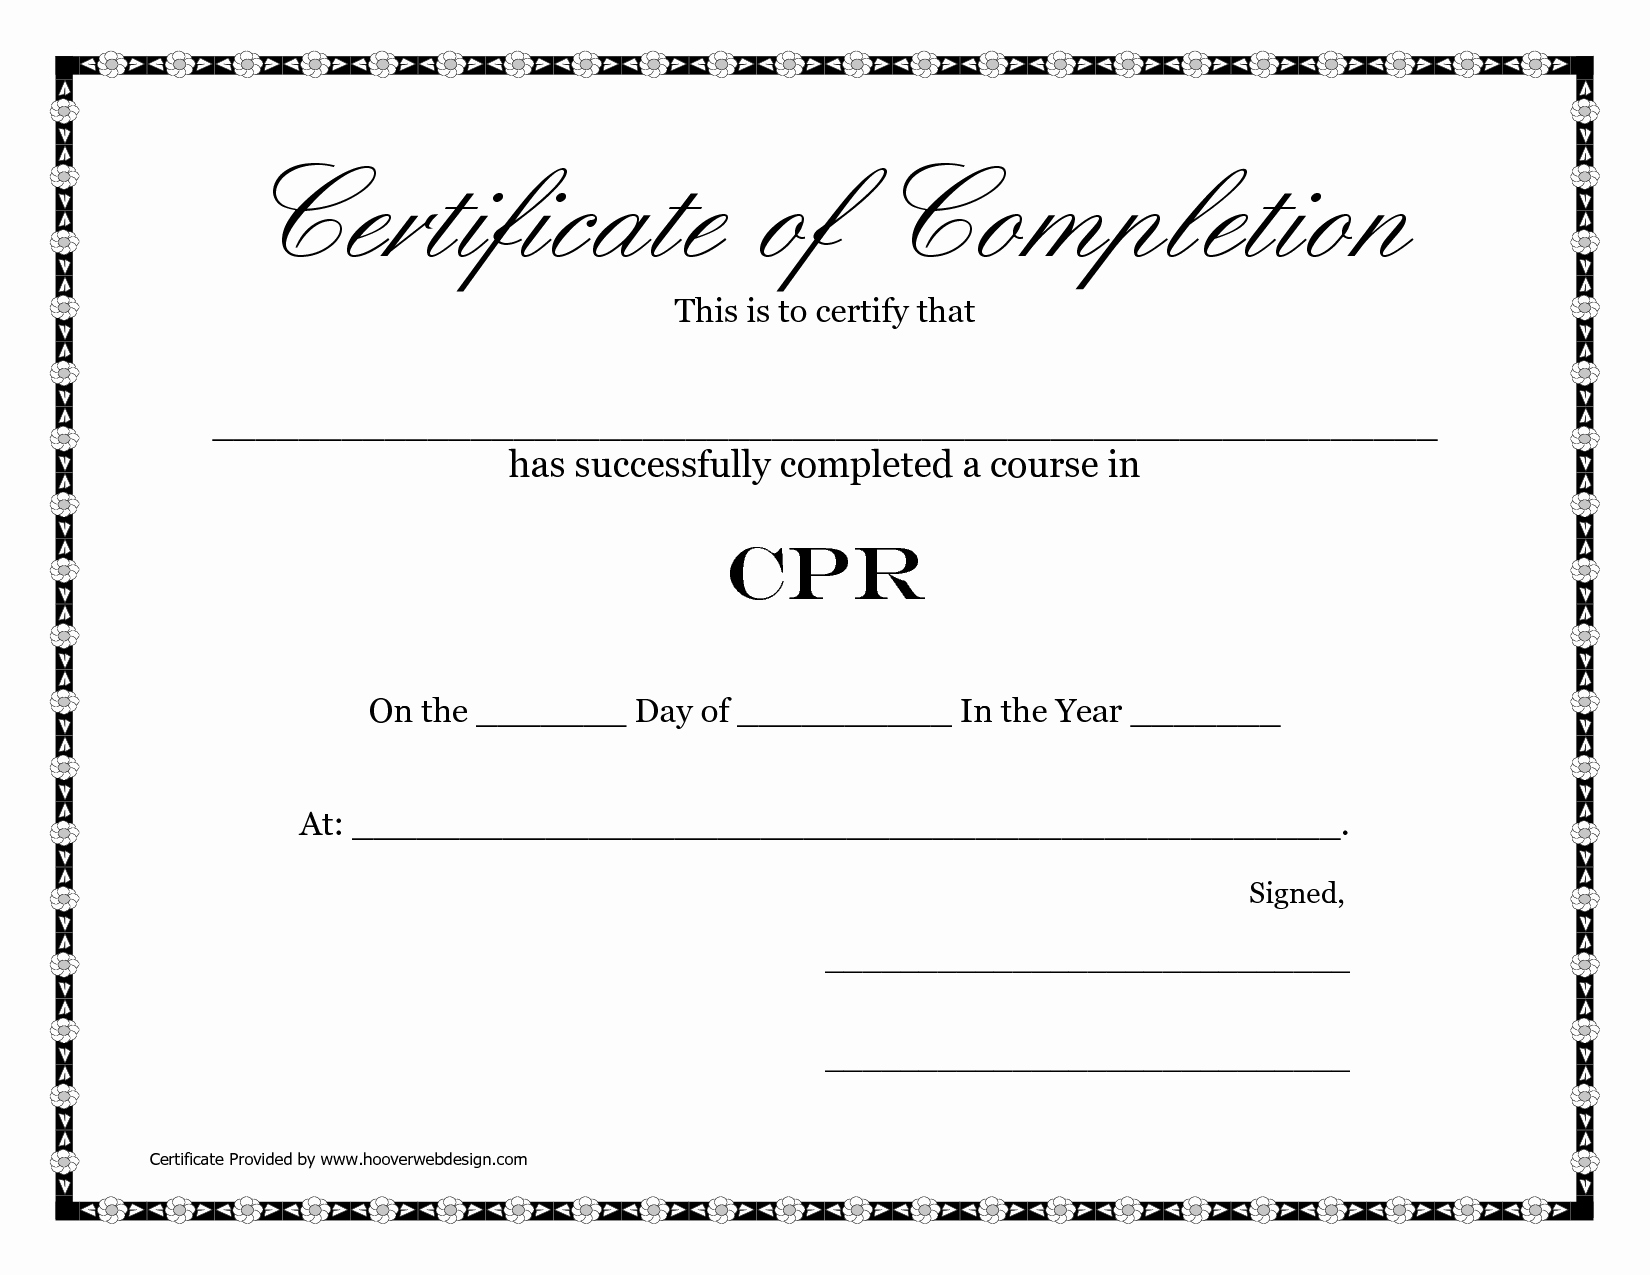 Blank Certificate Of Completion Template New Printable Blank Certificate Pletion Cpr Template V